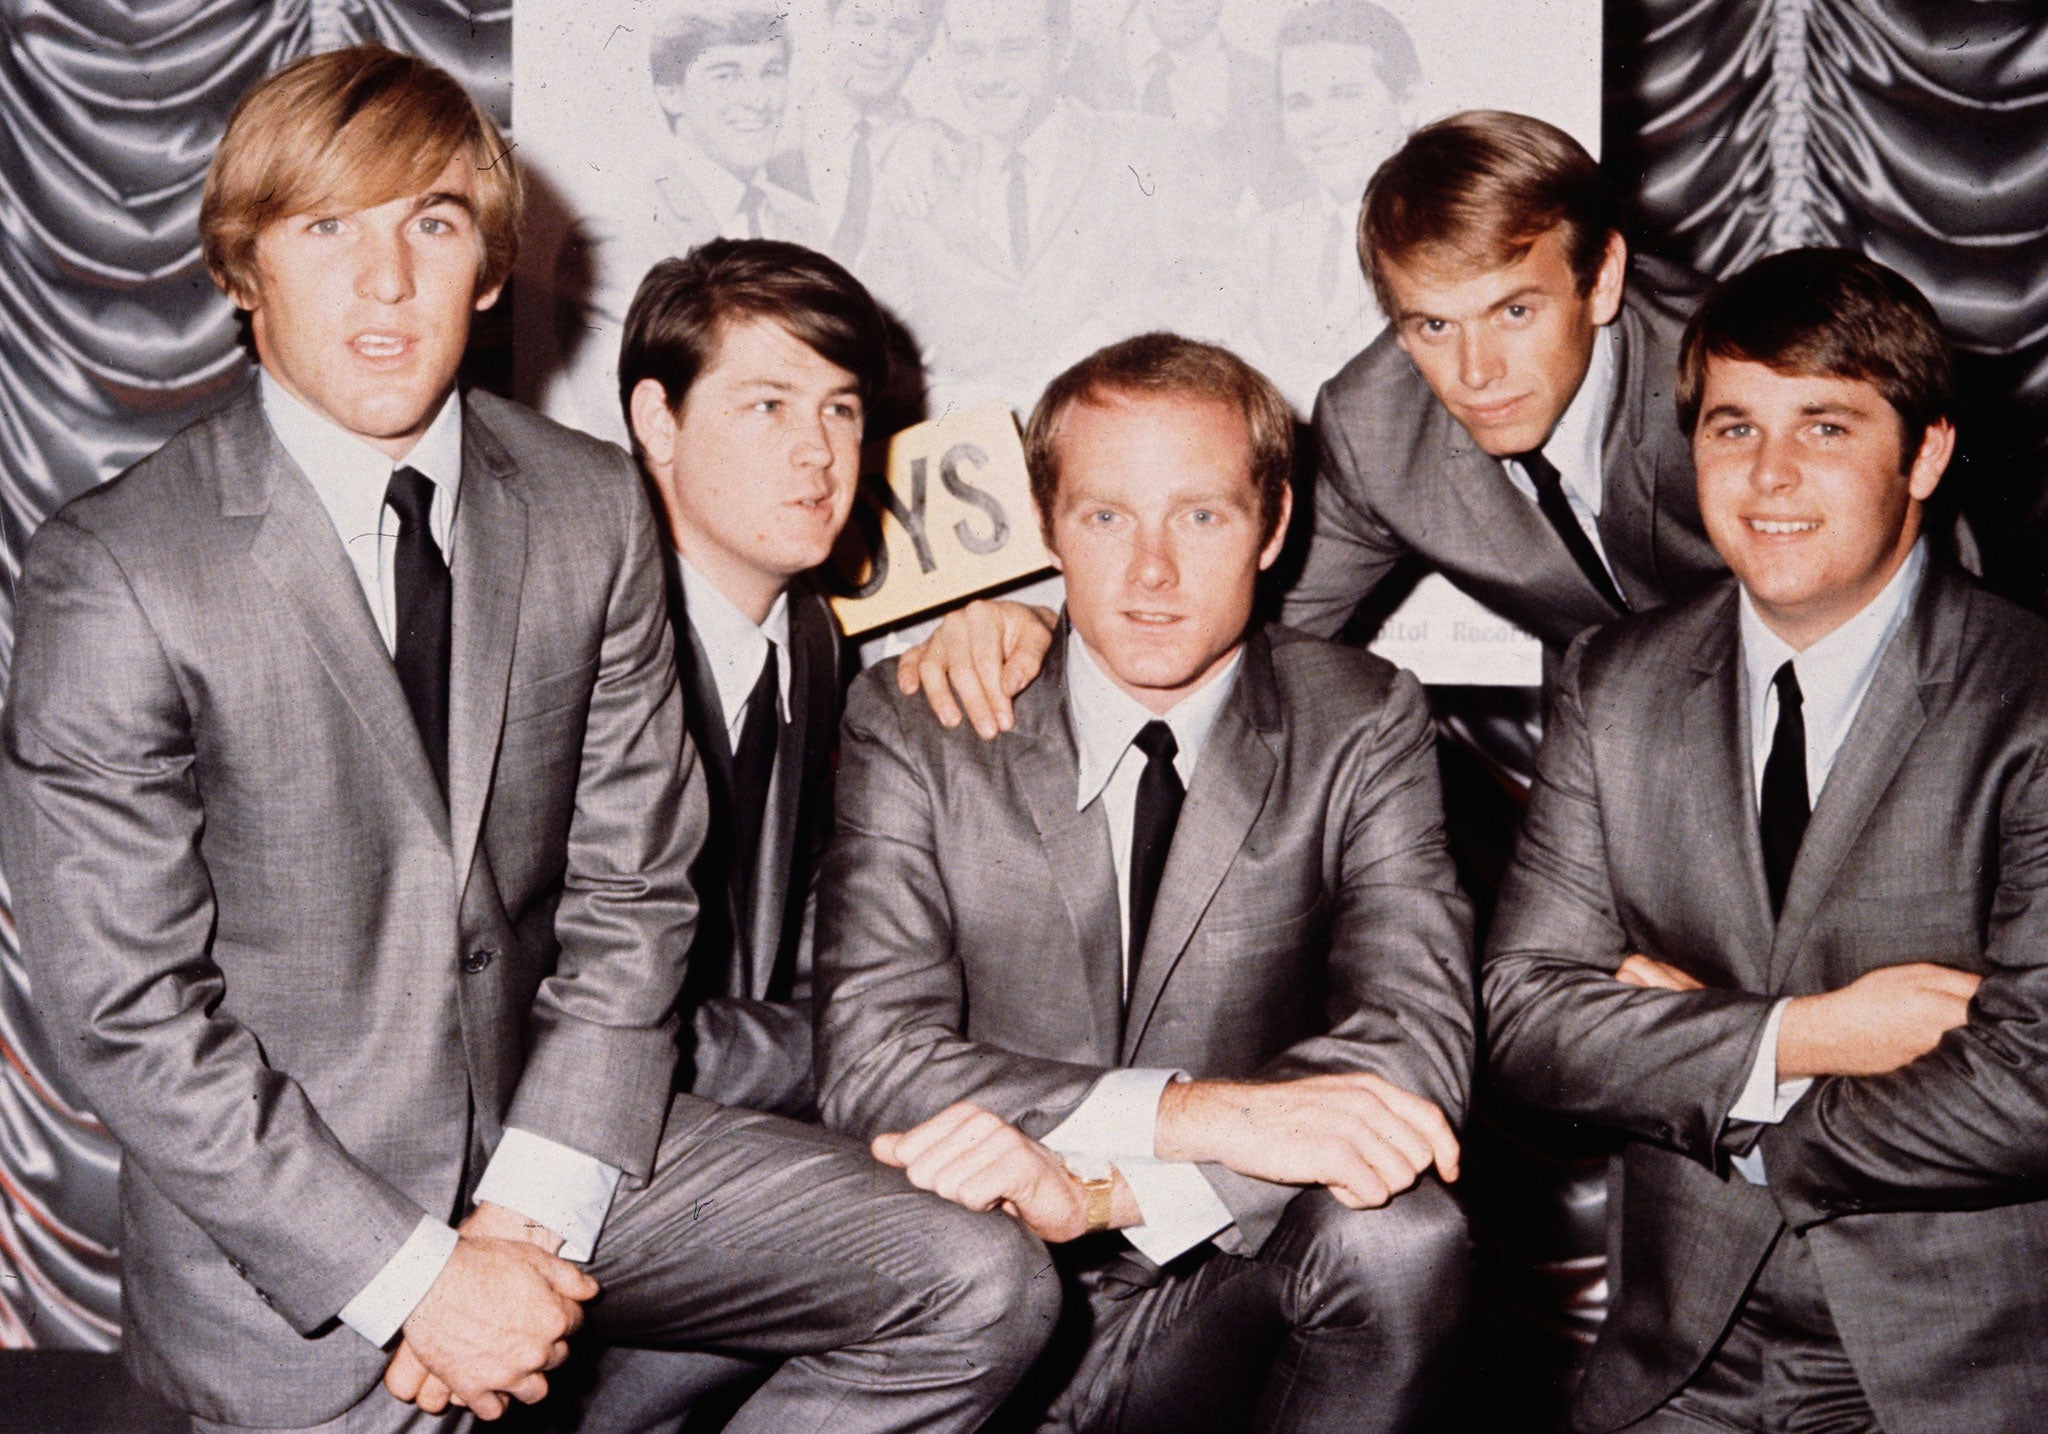 The Beach Boys in 1964: from left to right, Dennis Wilson, Brian Wilson, Mike Love, Al Jardine and Carl Wilson